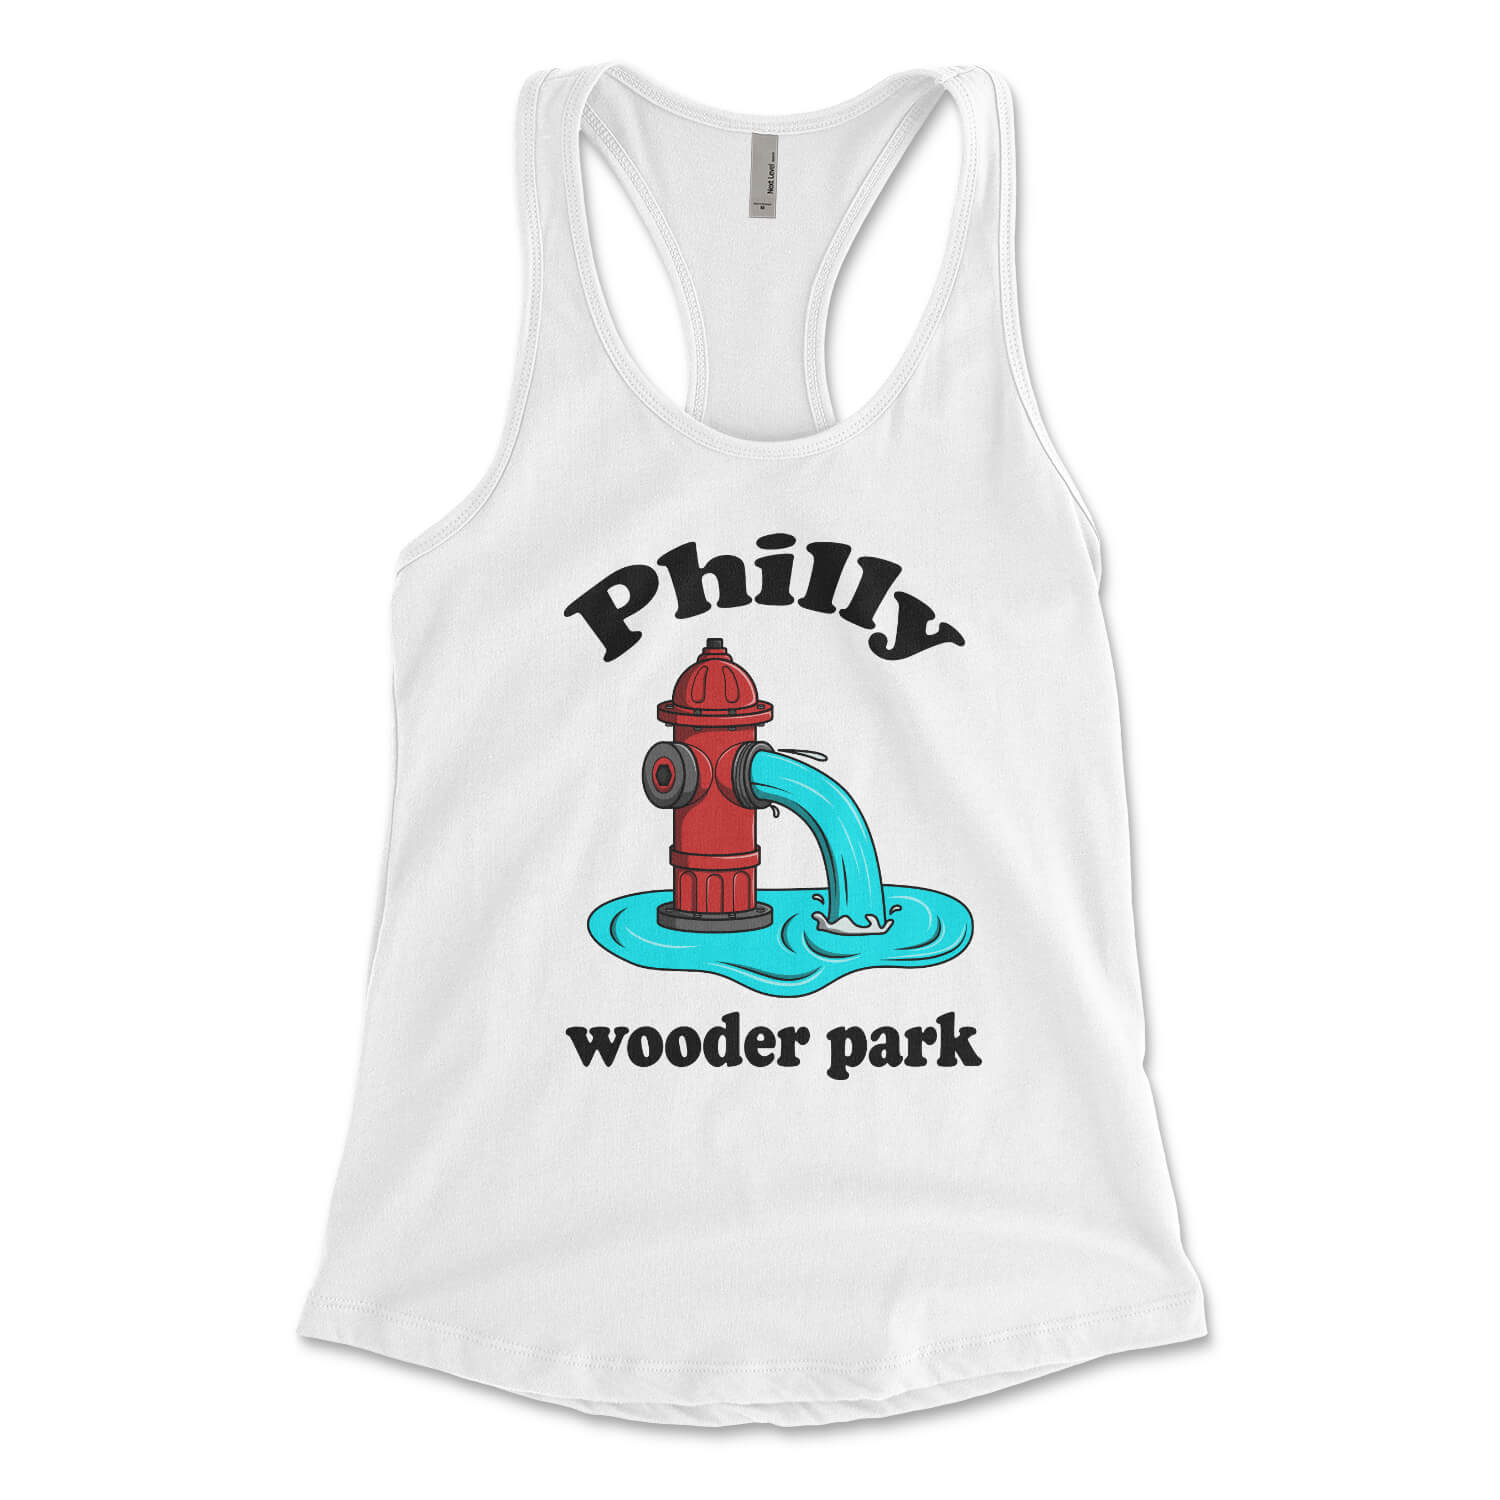 Philadelphia fire hydrant Philly wooder park on a white womens racerback tank top from Phillygoat